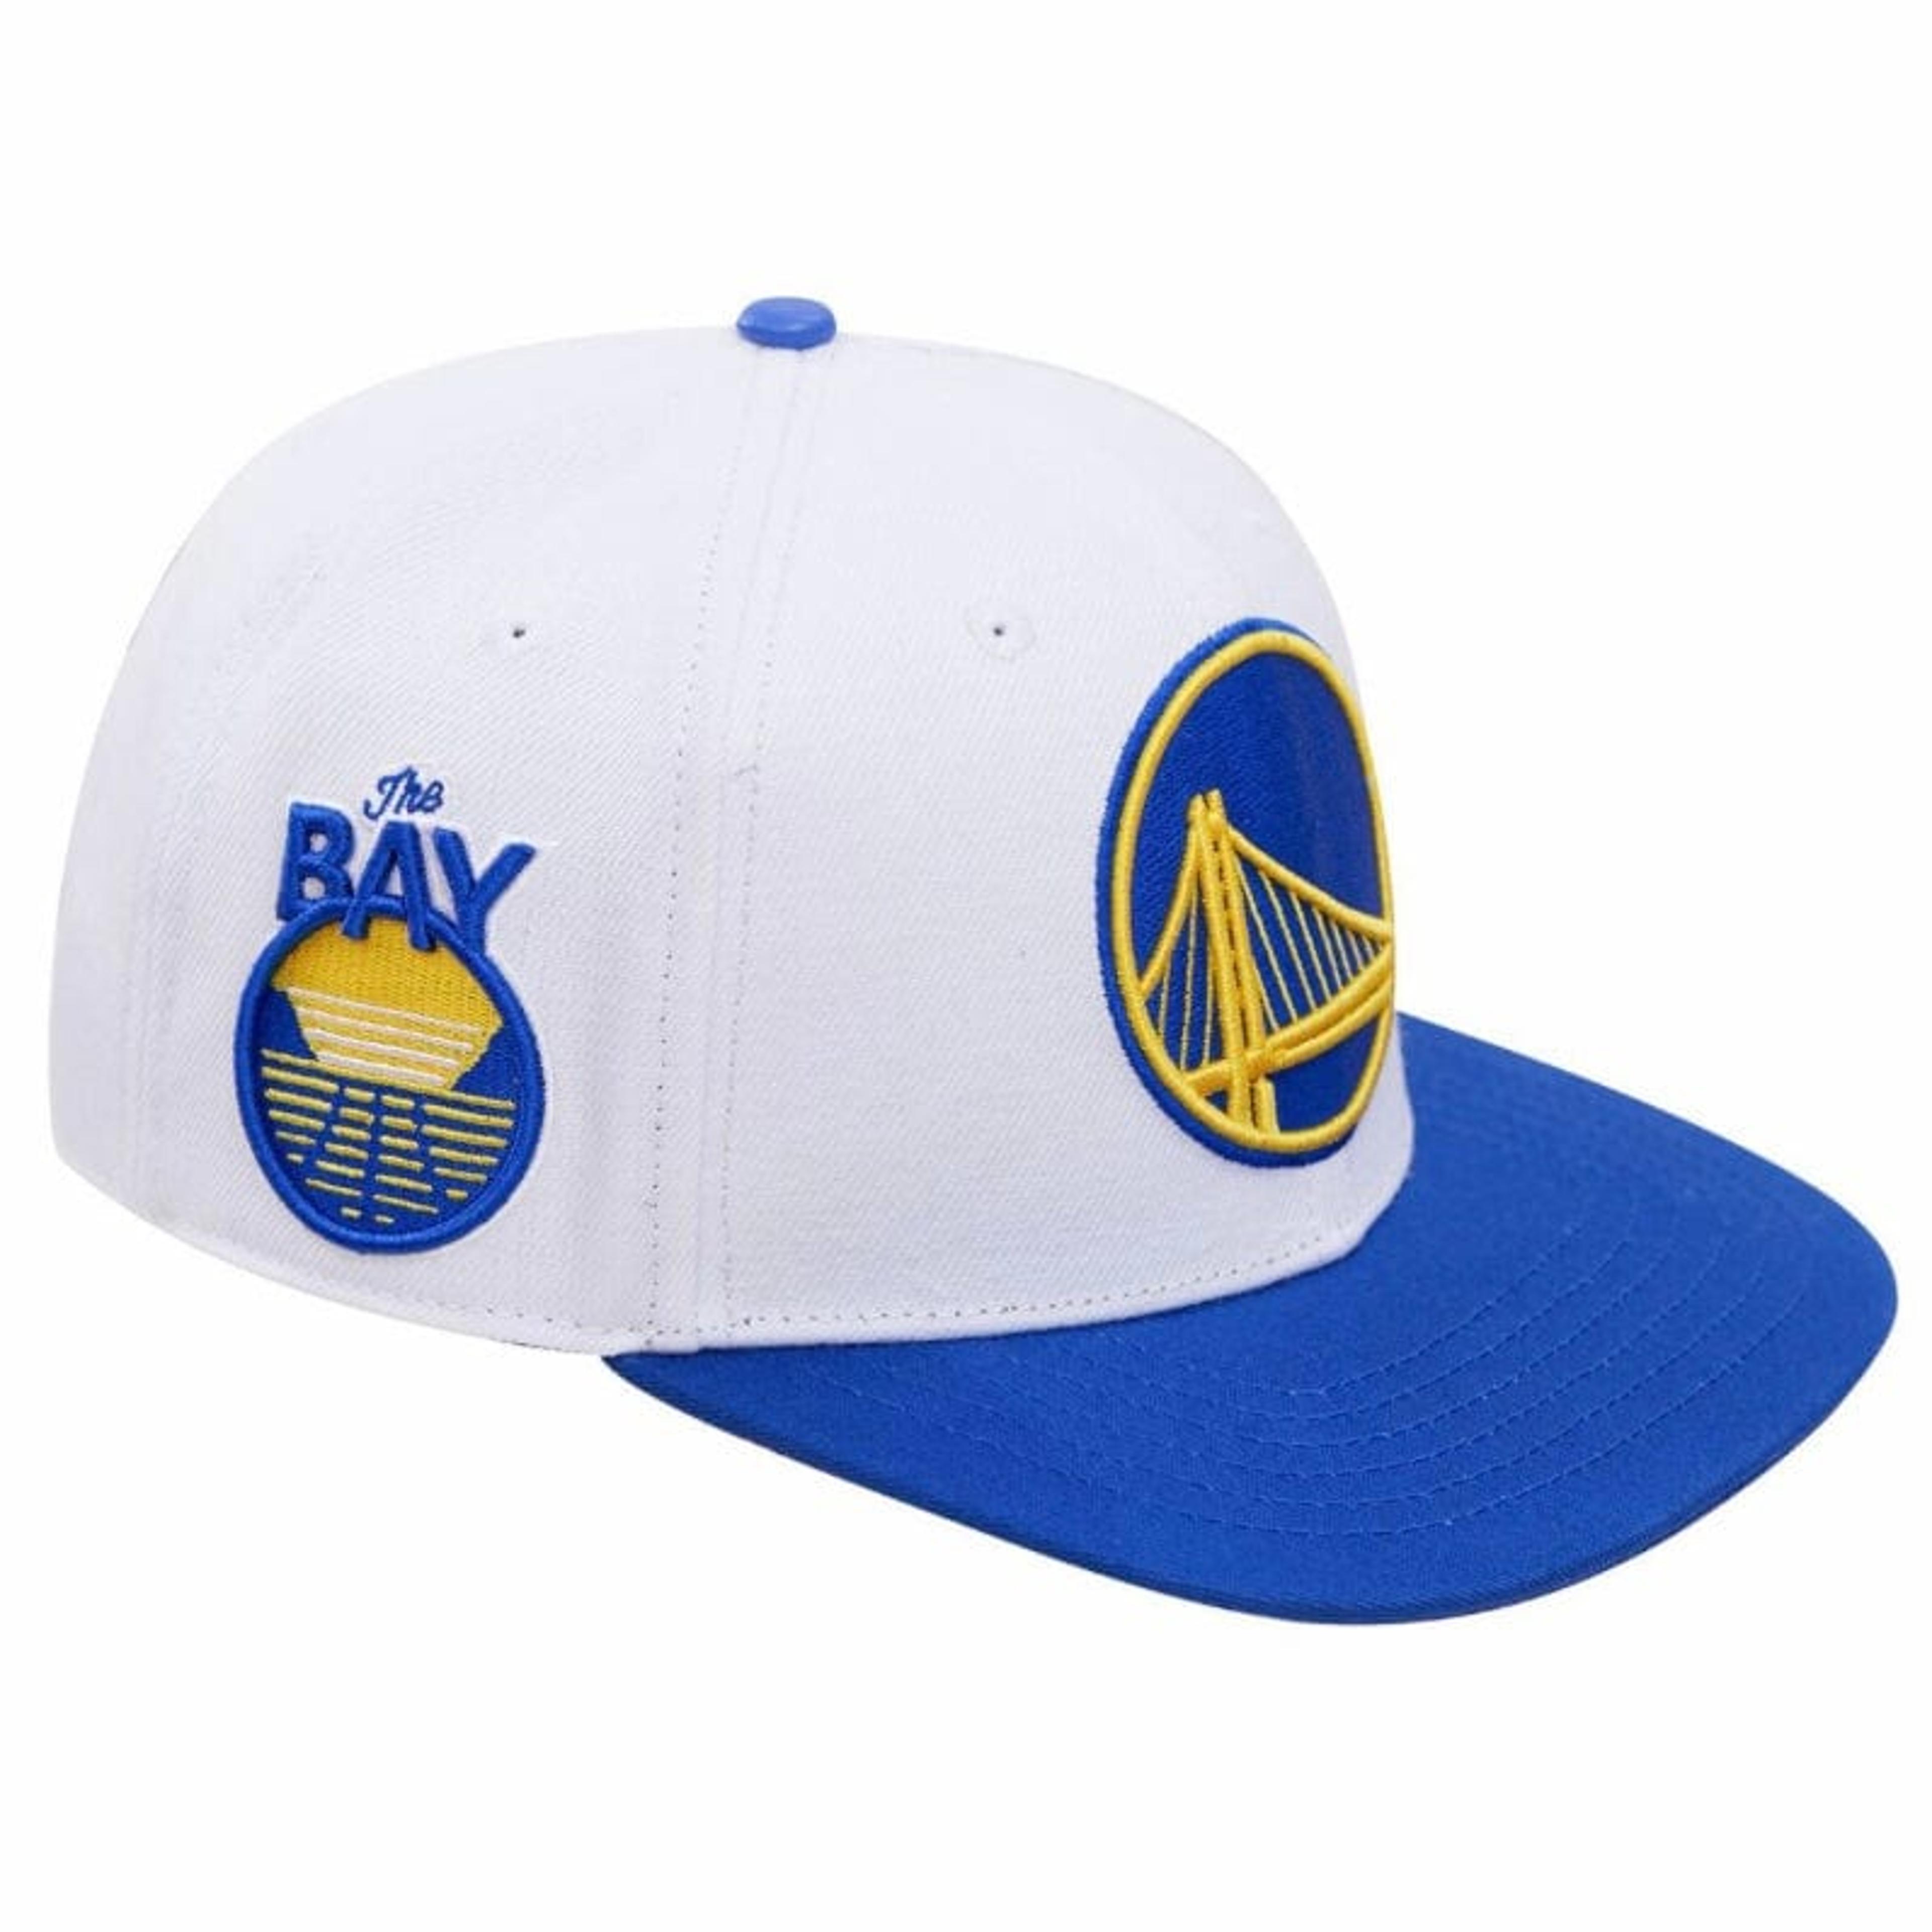 NTWRK - Golden State Warriors Color Pack 9FIFTY Snapback Hat